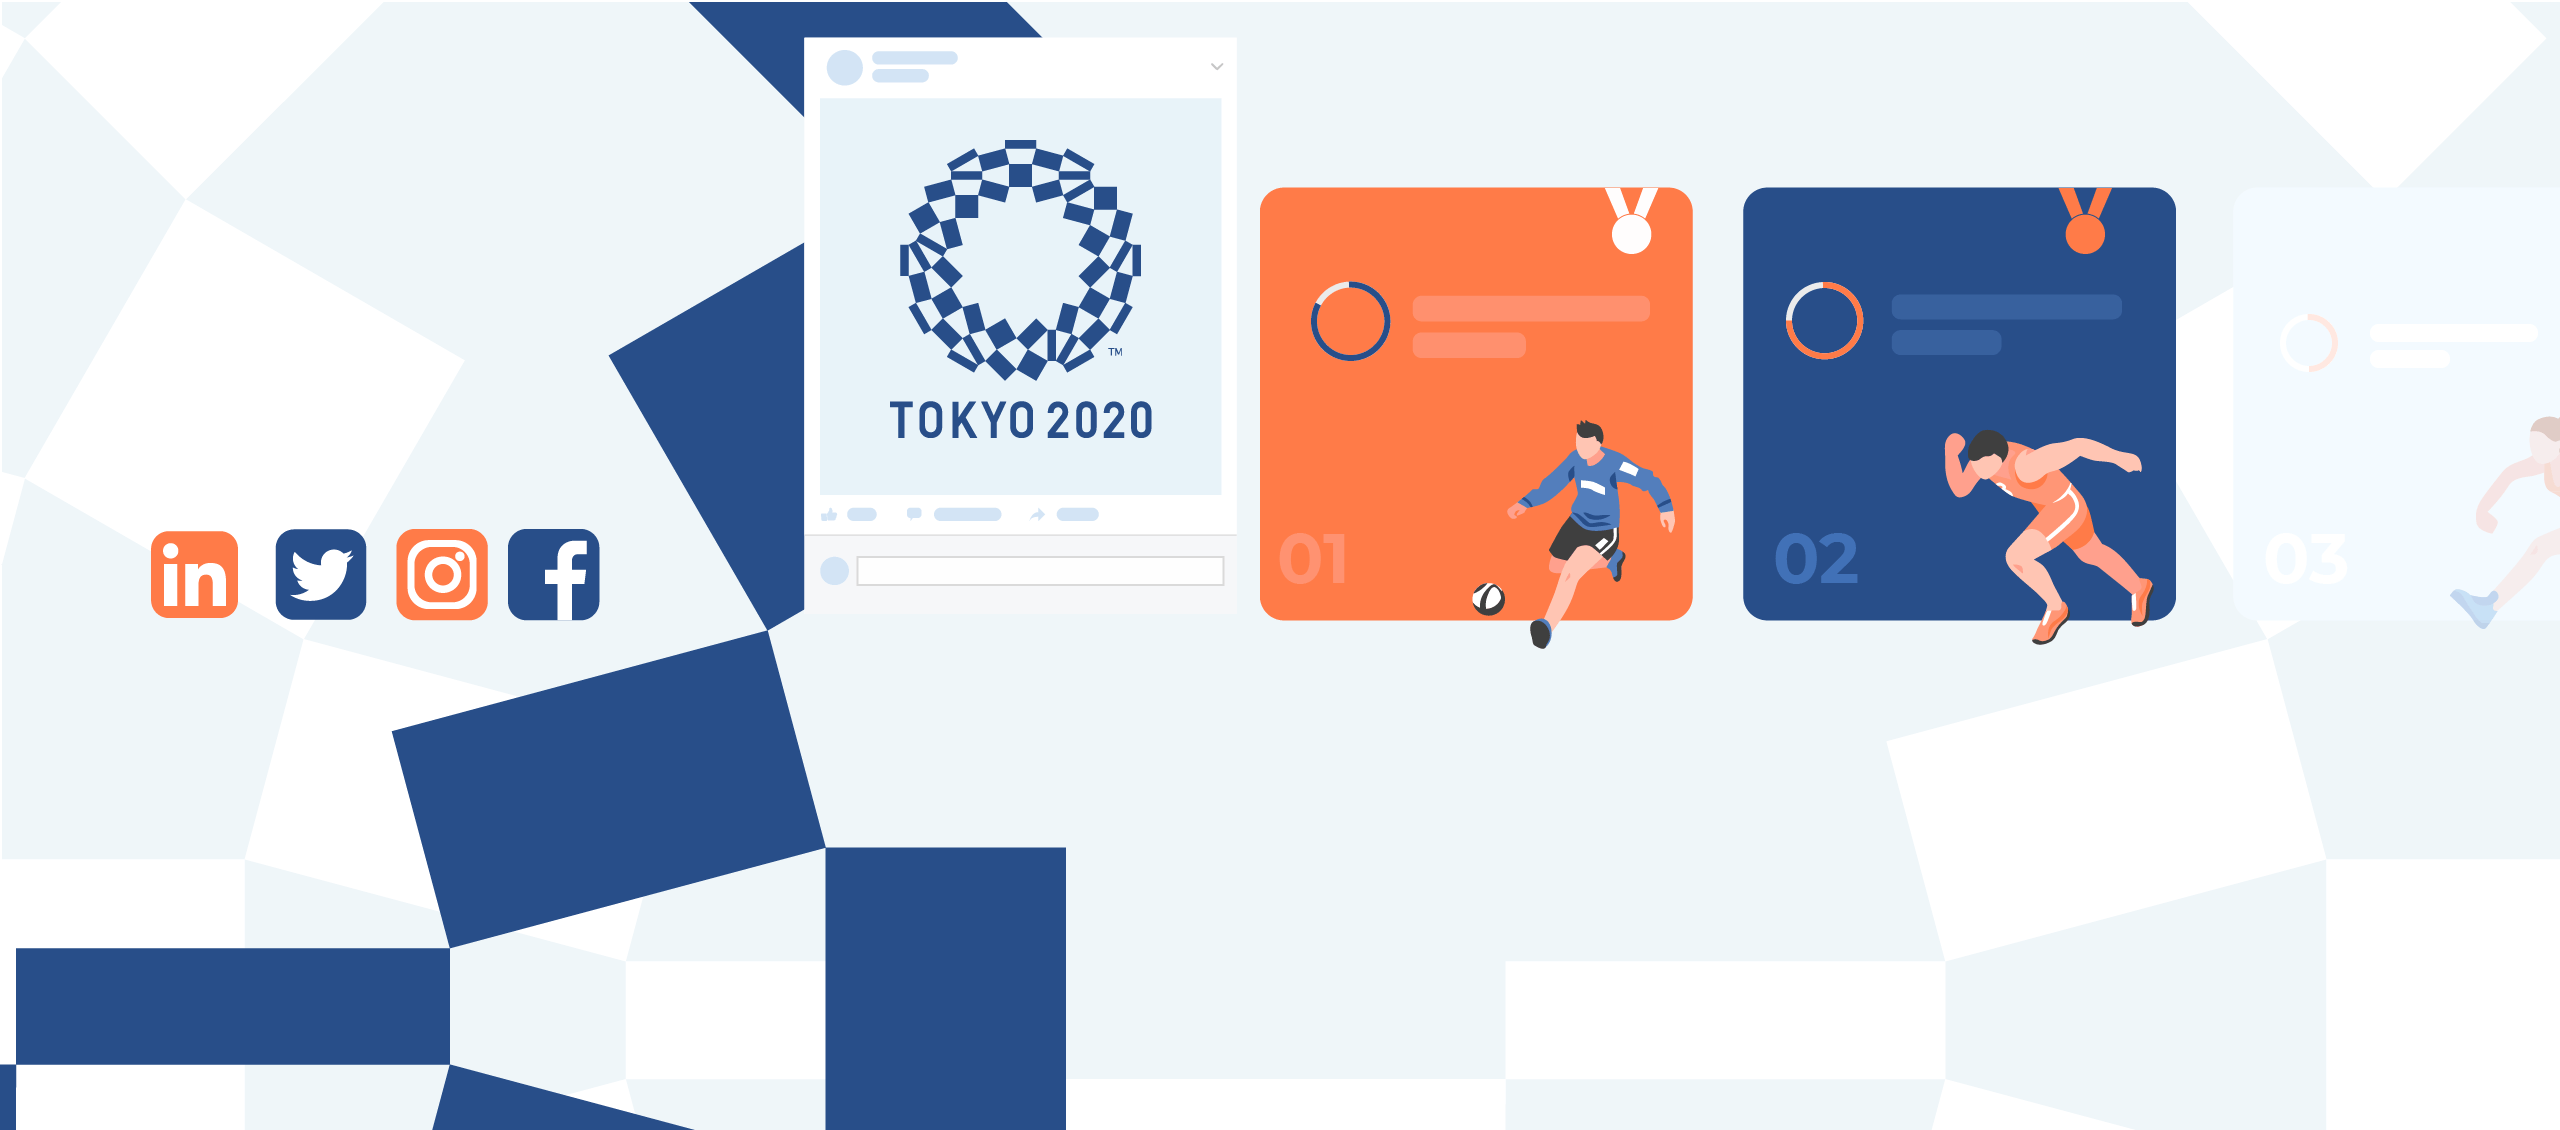 Unlocking New Opportunities: What Can Brands Learn from the Tokyo Olympics 2020?